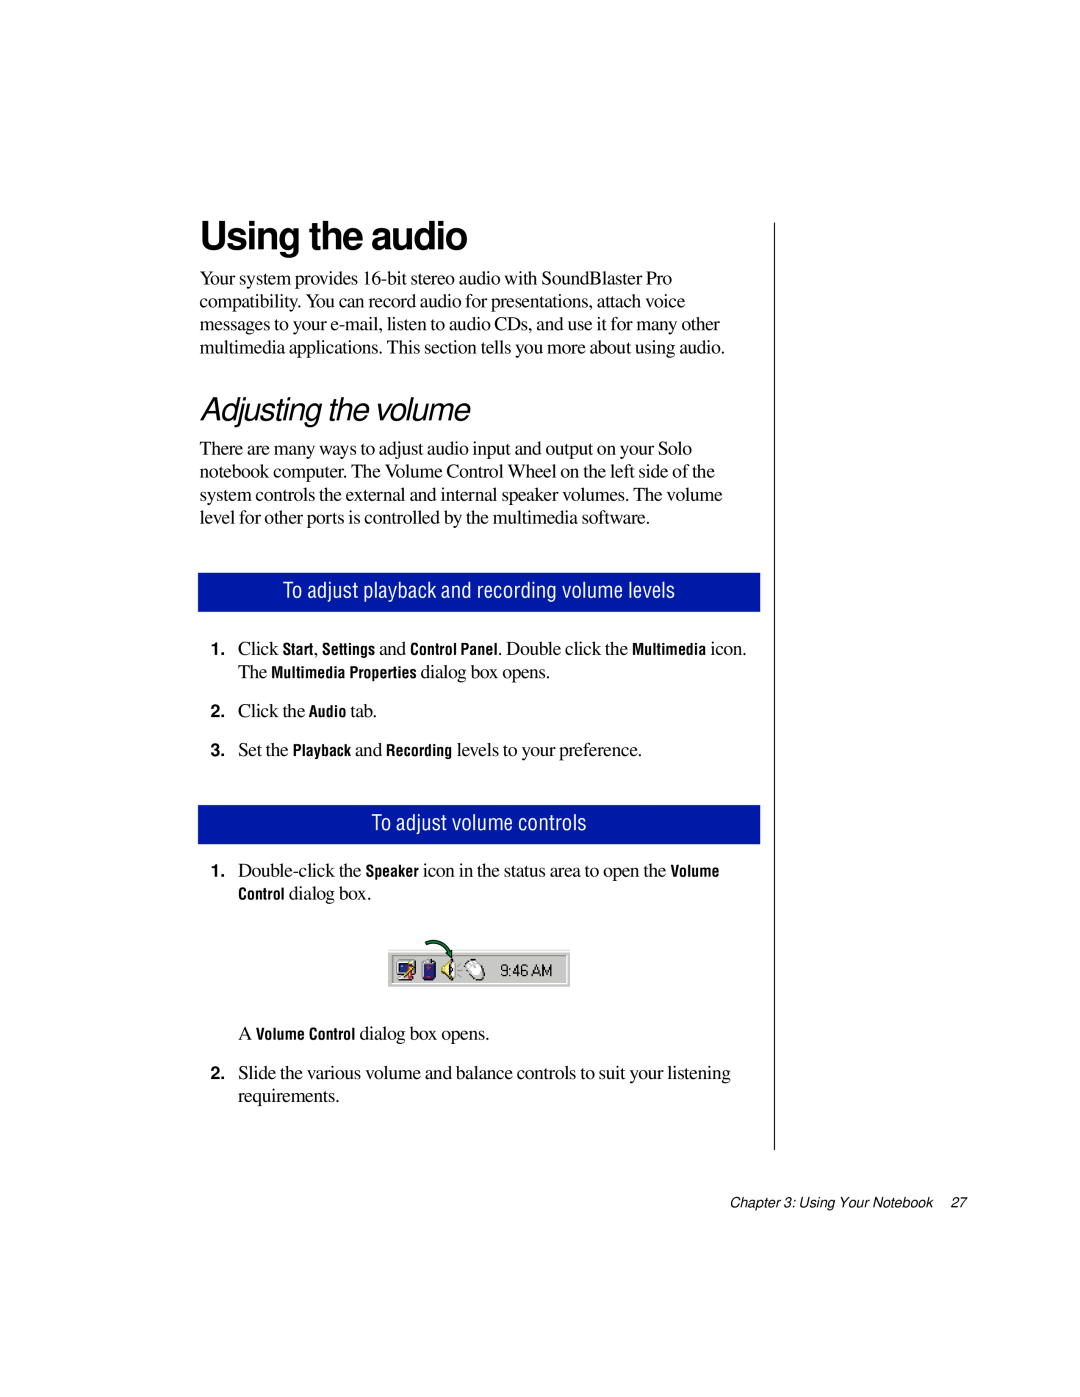 Gateway TM 5150 manual Using the audio, Adjusting the volume, To adjust playback and recording volume levels 